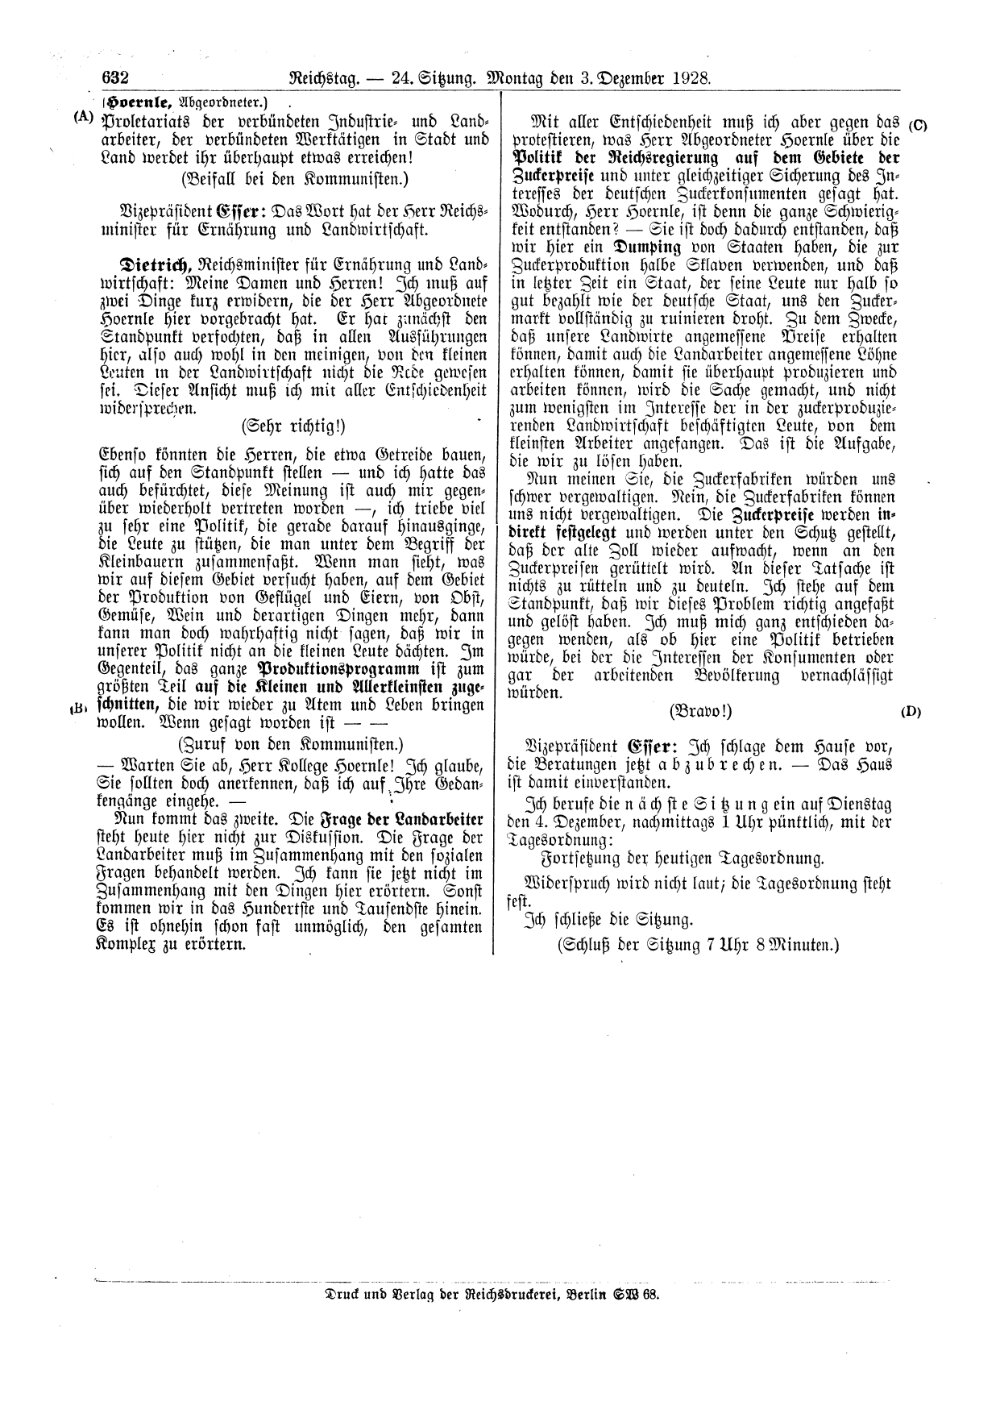 Scan of page 632